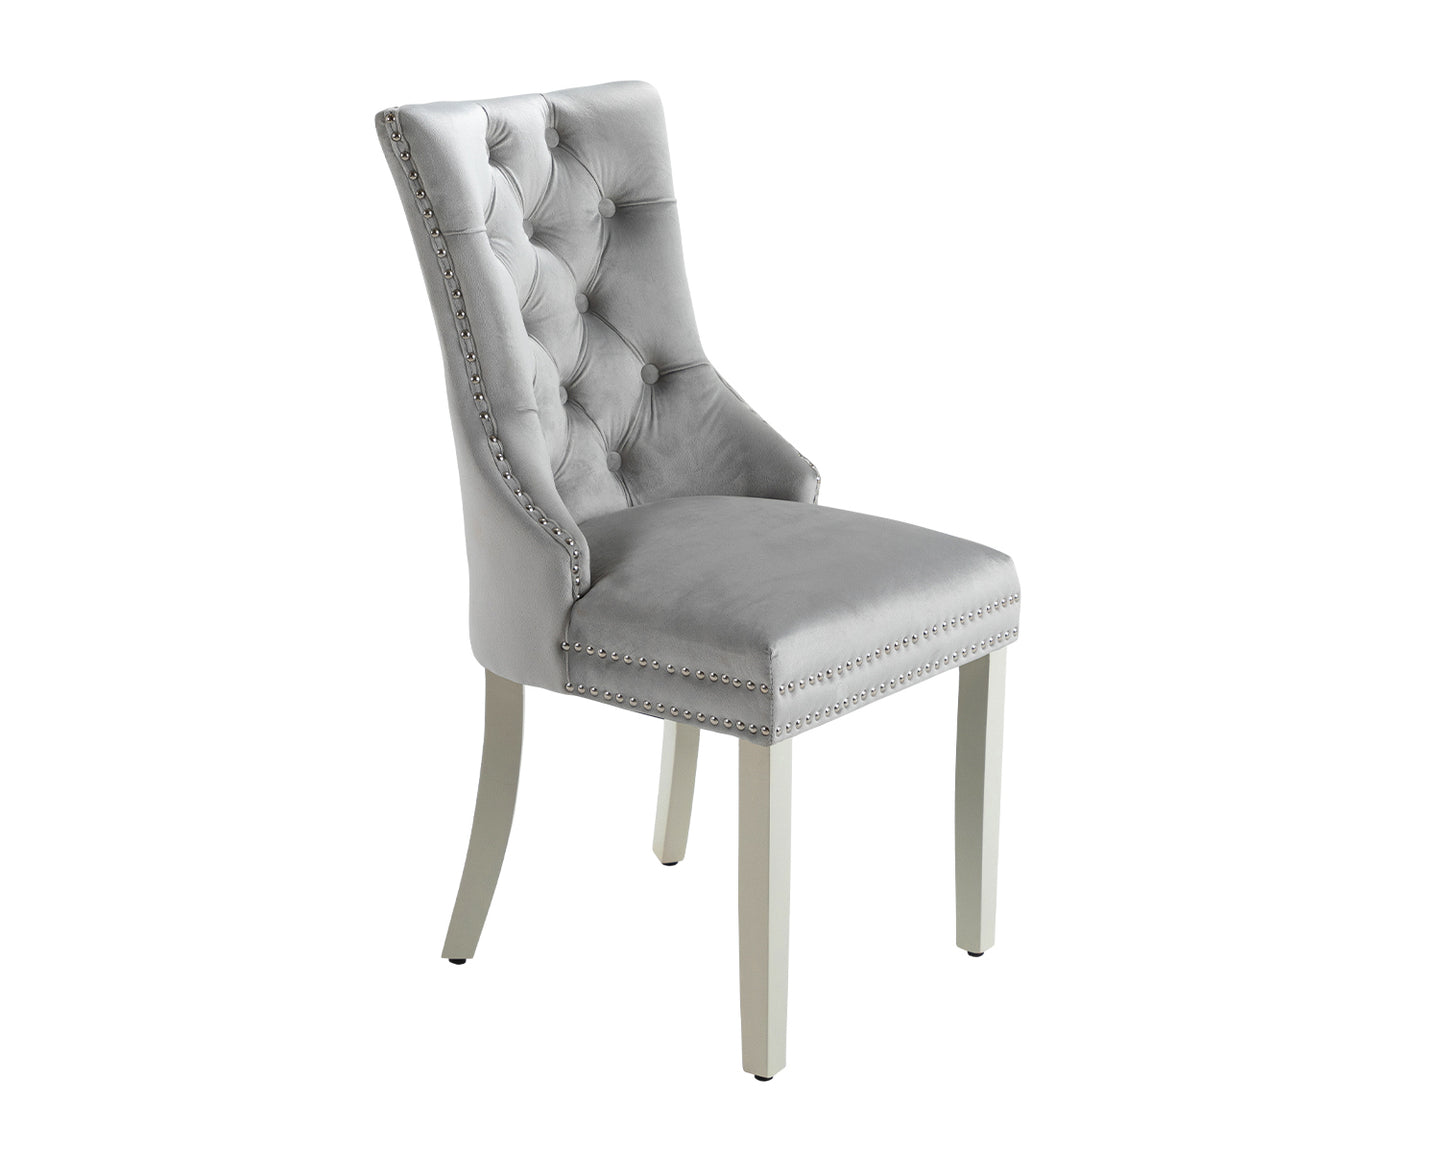 Ashford Dining Chair in Light Grey Velvet with Square Knocker And Grey Legs